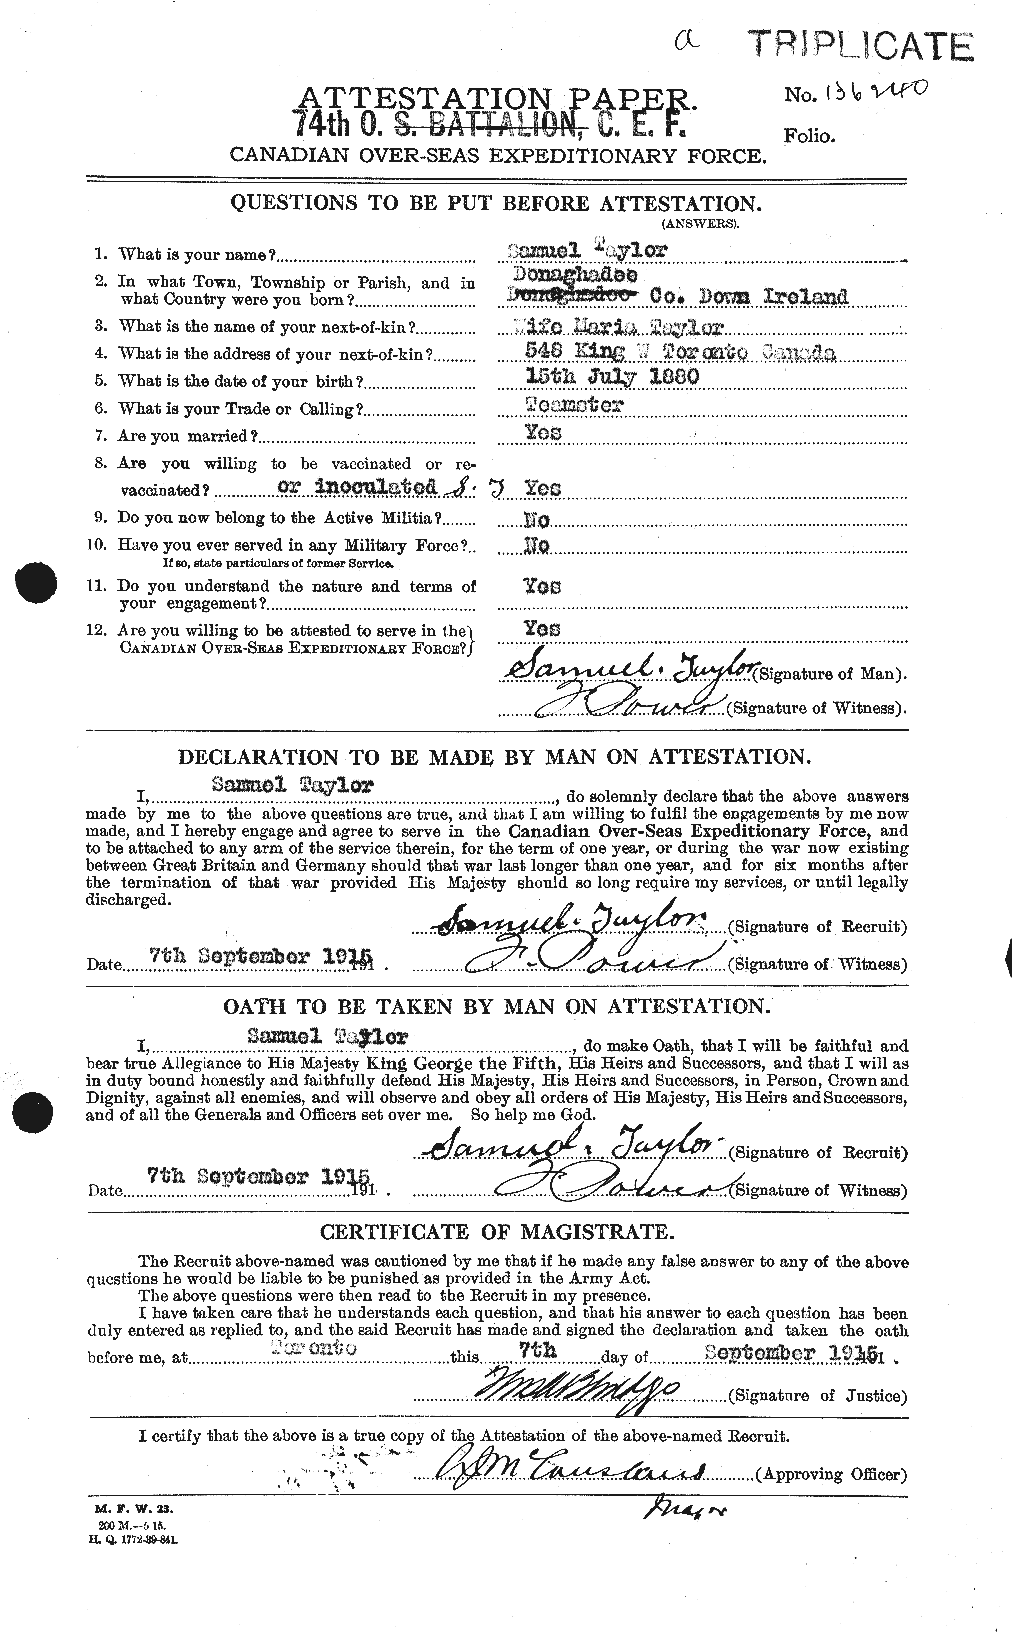 Personnel Records of the First World War - CEF 627874a